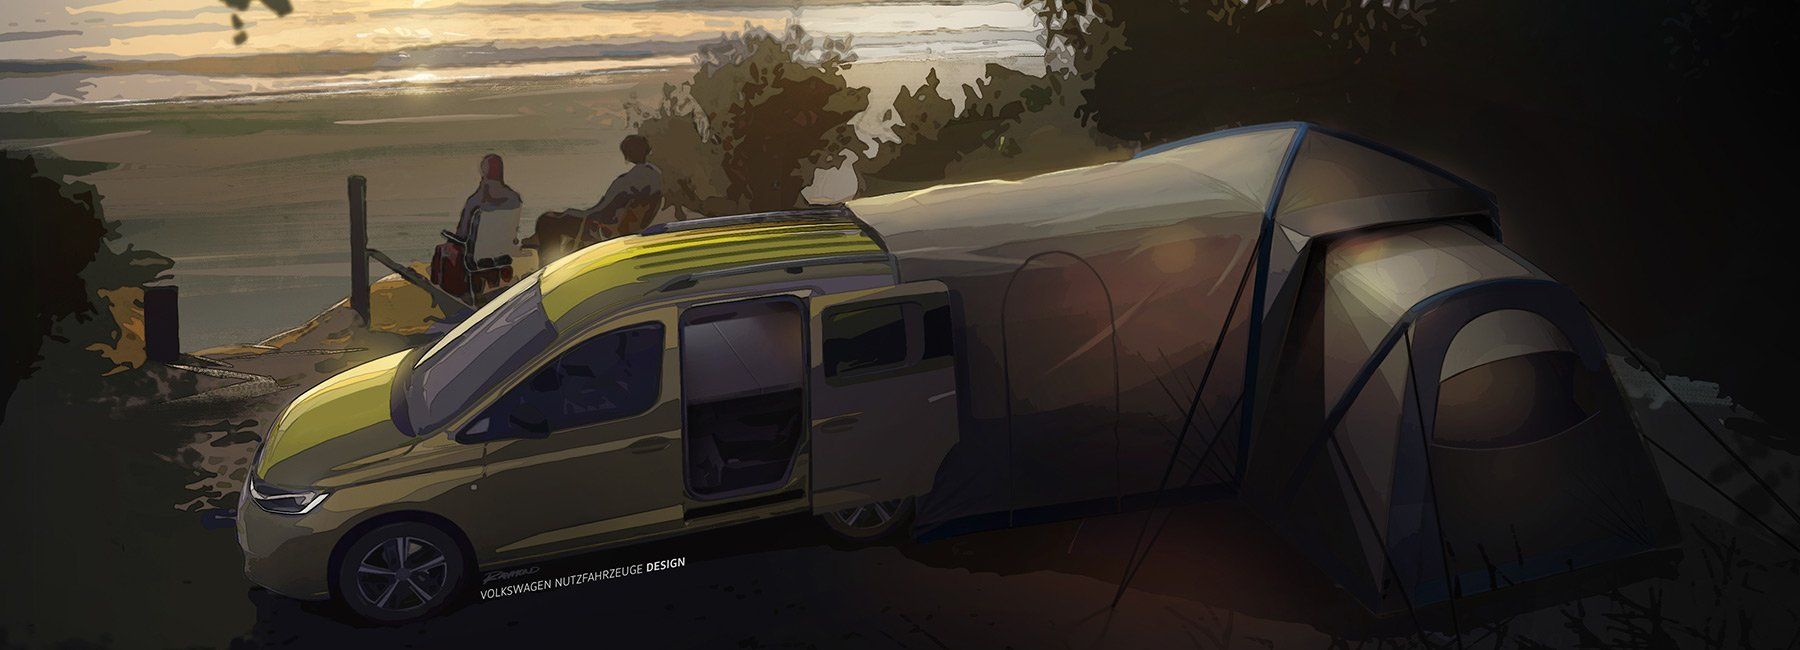 Volkswagen debuts a new model designed for camping